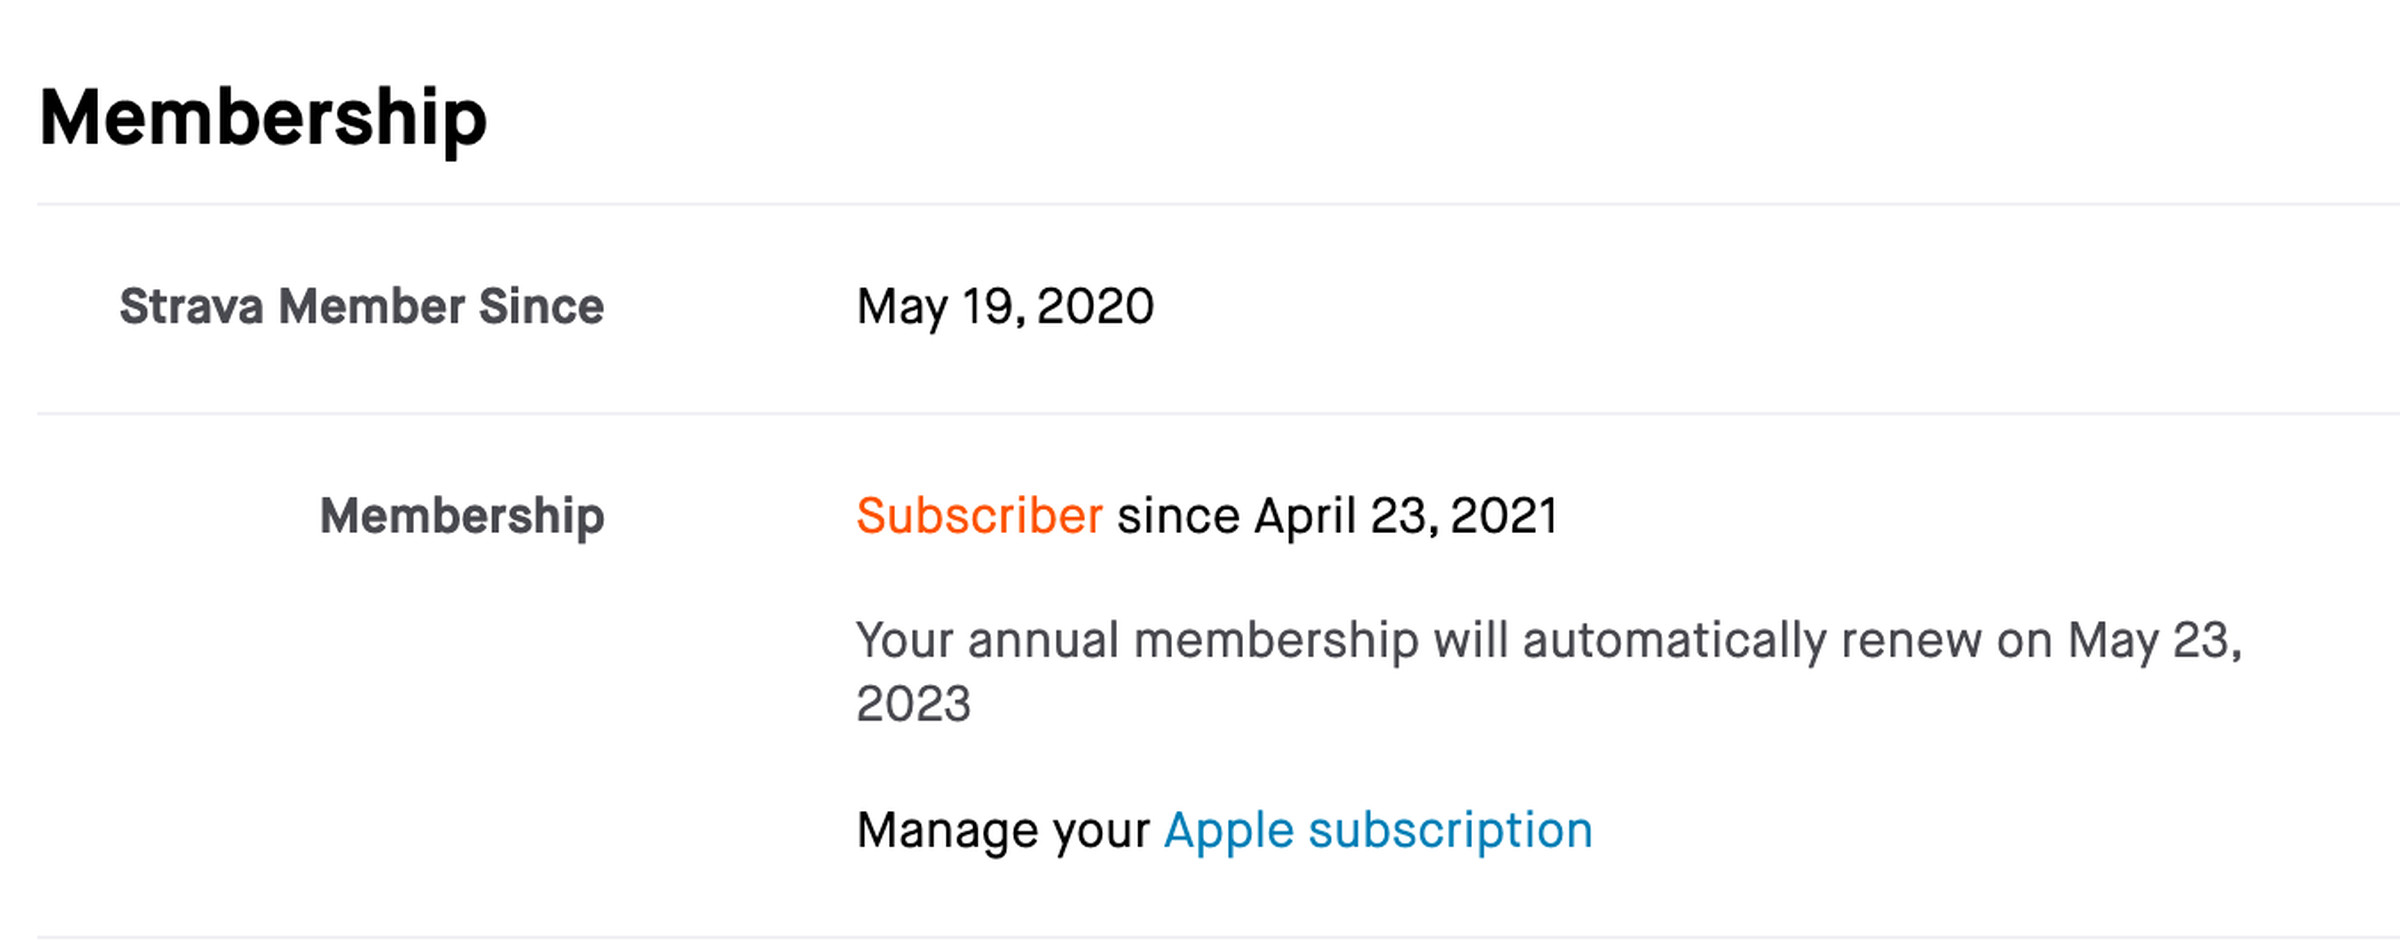 Screenshot of the Strava membership page which only lists the membership date, subscription start date, and a link to manage the subscription through Apple